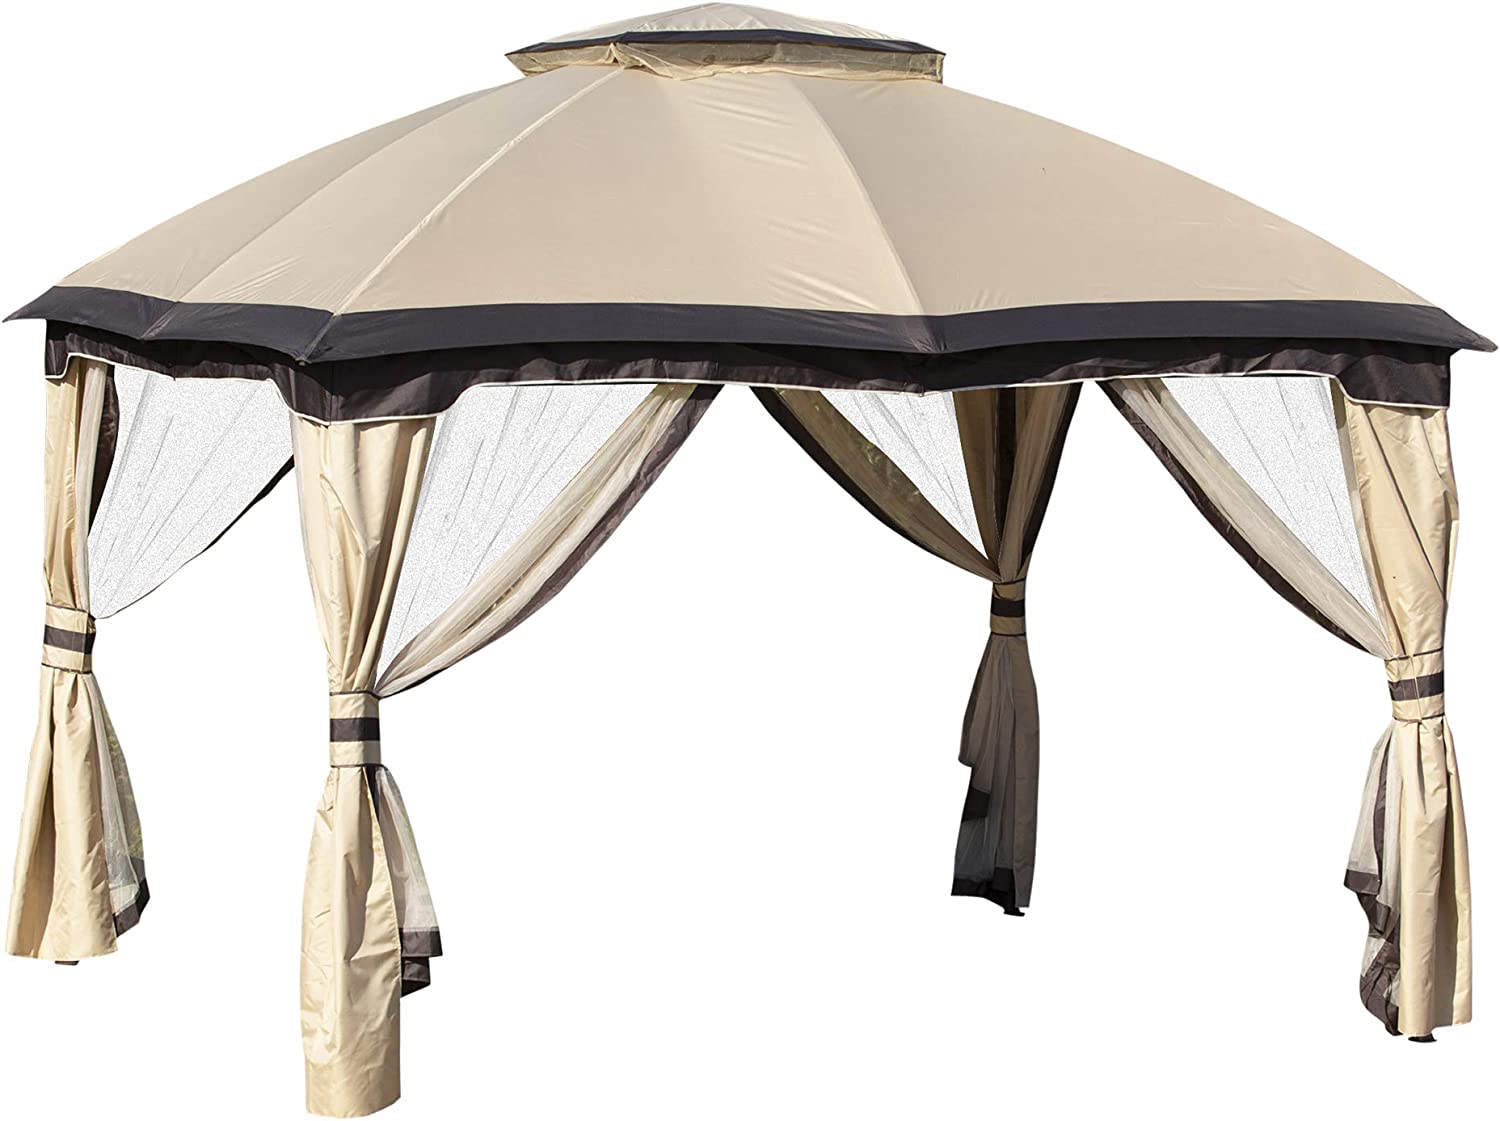 Outsunny 10' x 12' Outdoor Gazebo, Canopy Shelter w/Double Vented Roof - $290